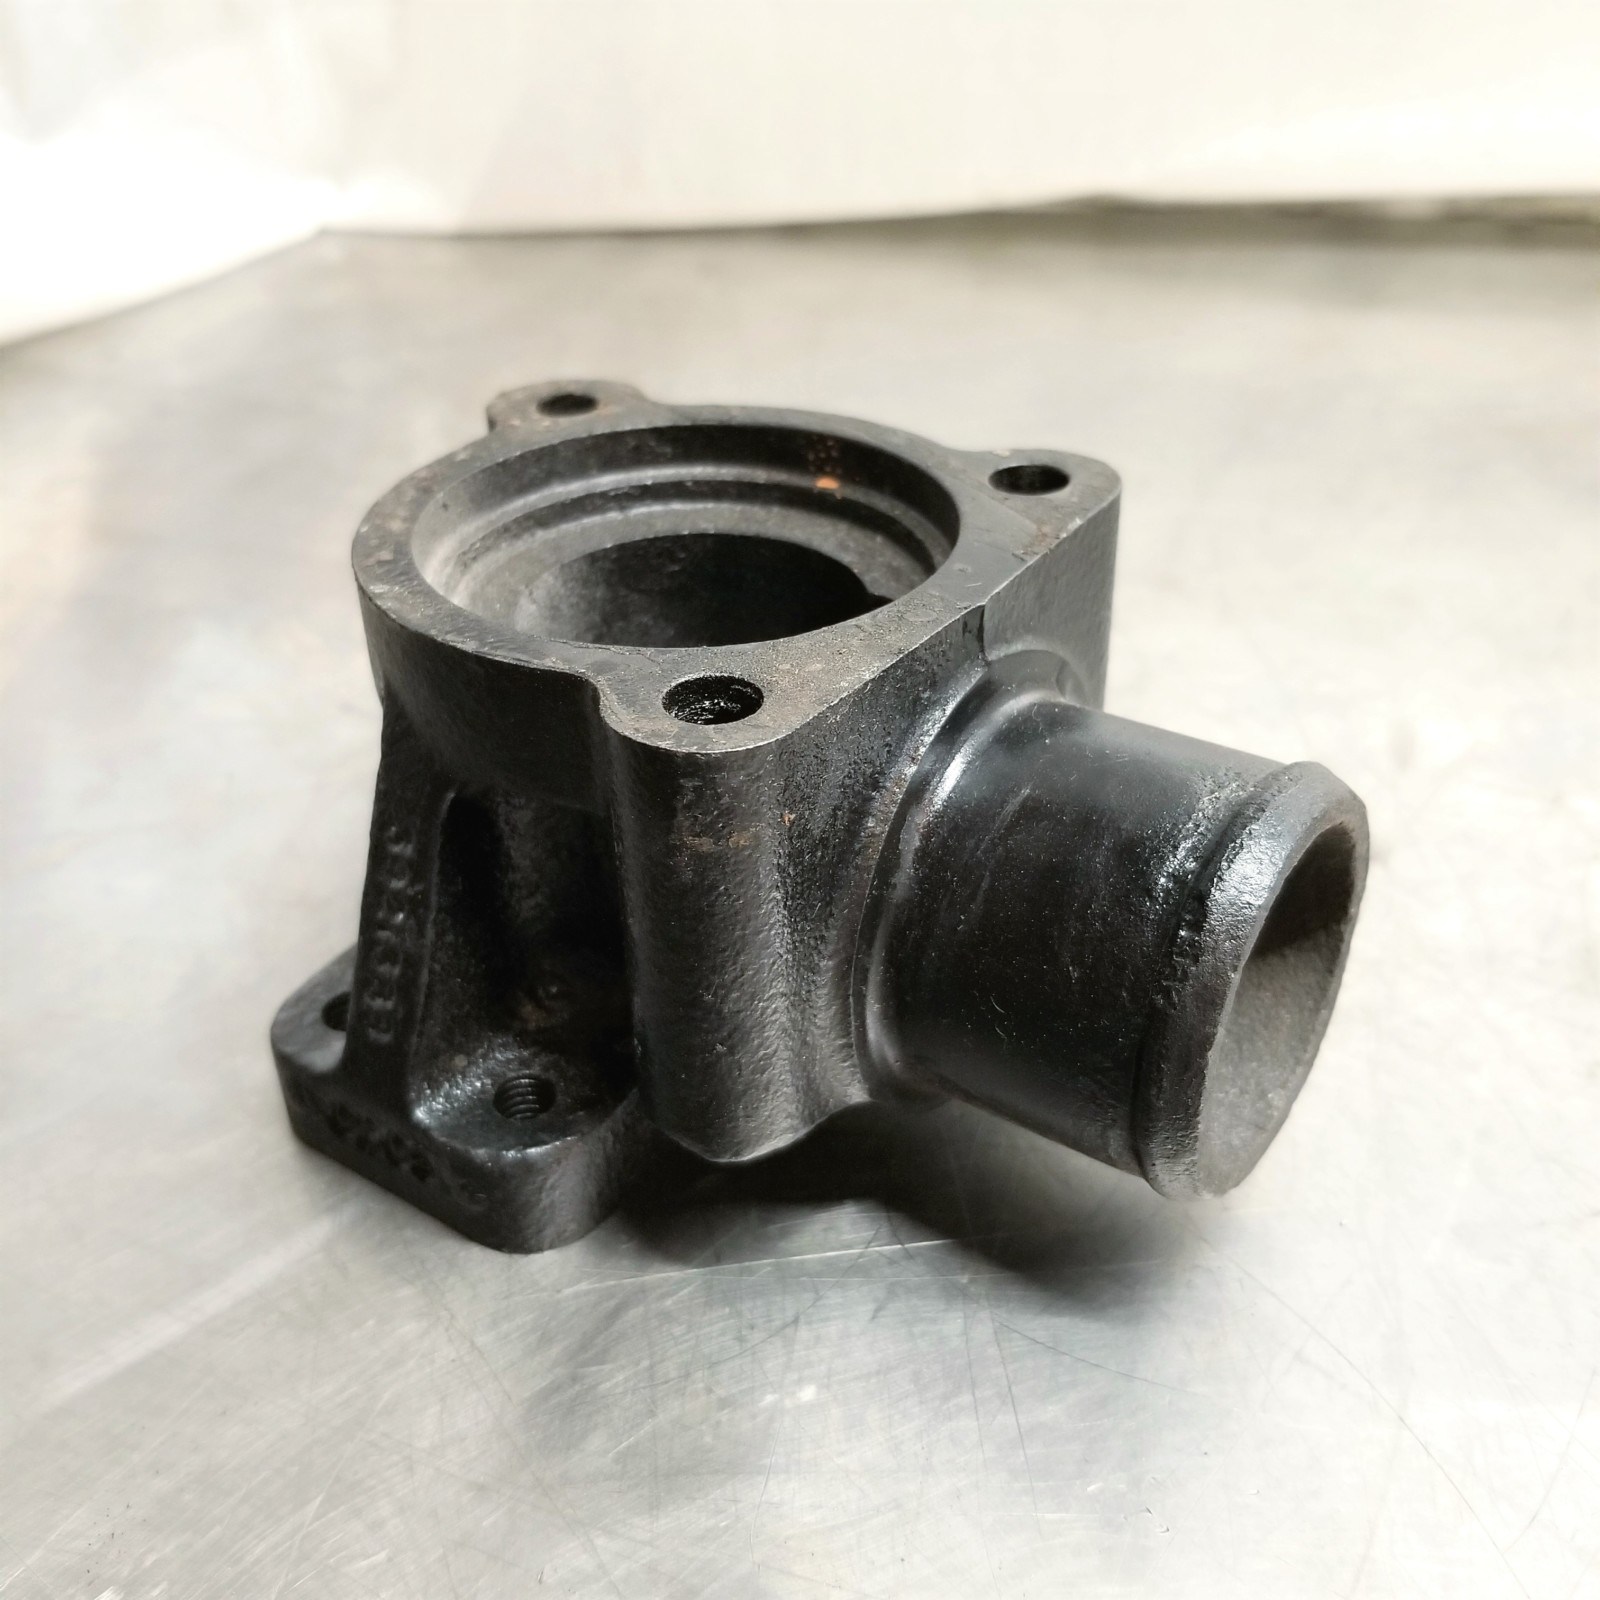 Cummins Water Outlet / Thermostat Housing - for a B series Cummins ...